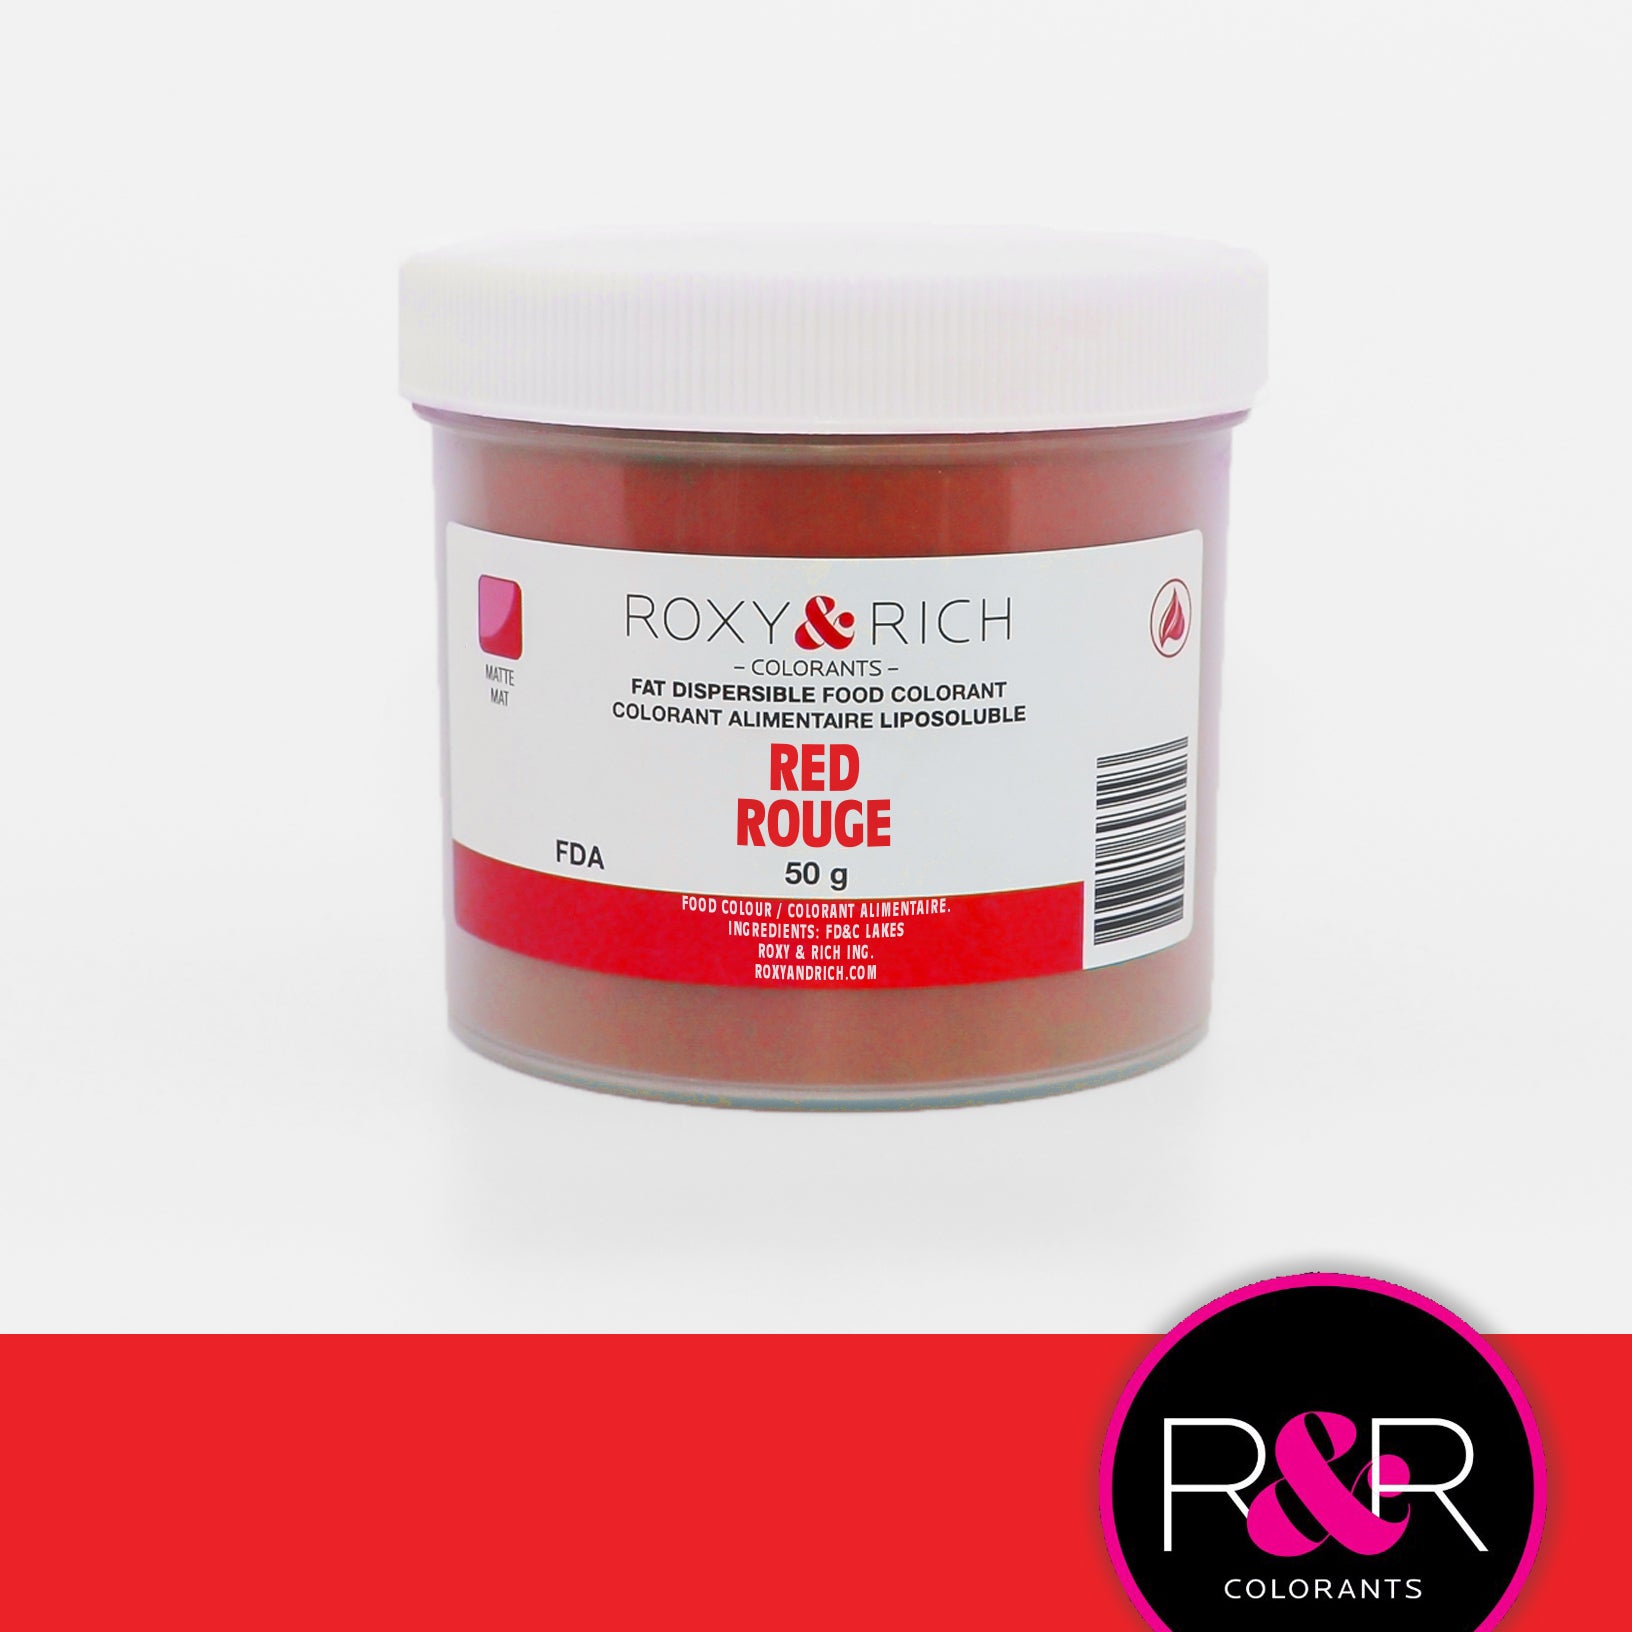 Colorant Alimentaire Liposoluble Rouge 50gr   - Roxy & Rich - Colorant alimentaire liposoluble - P50-B03